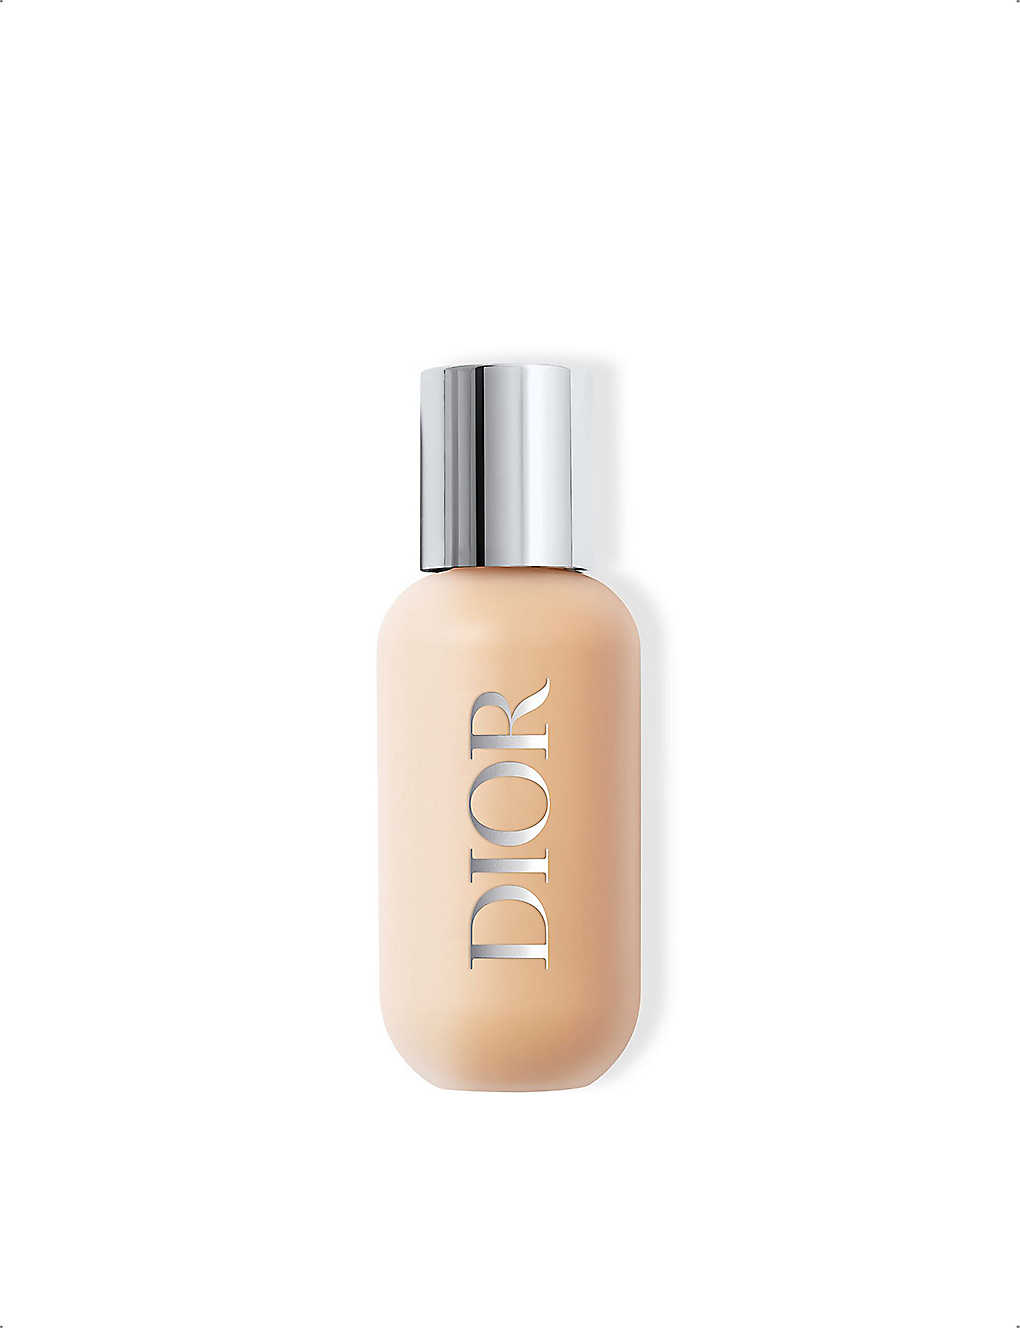 Dior 2wp Backstage Face & Body Foundation 50ml